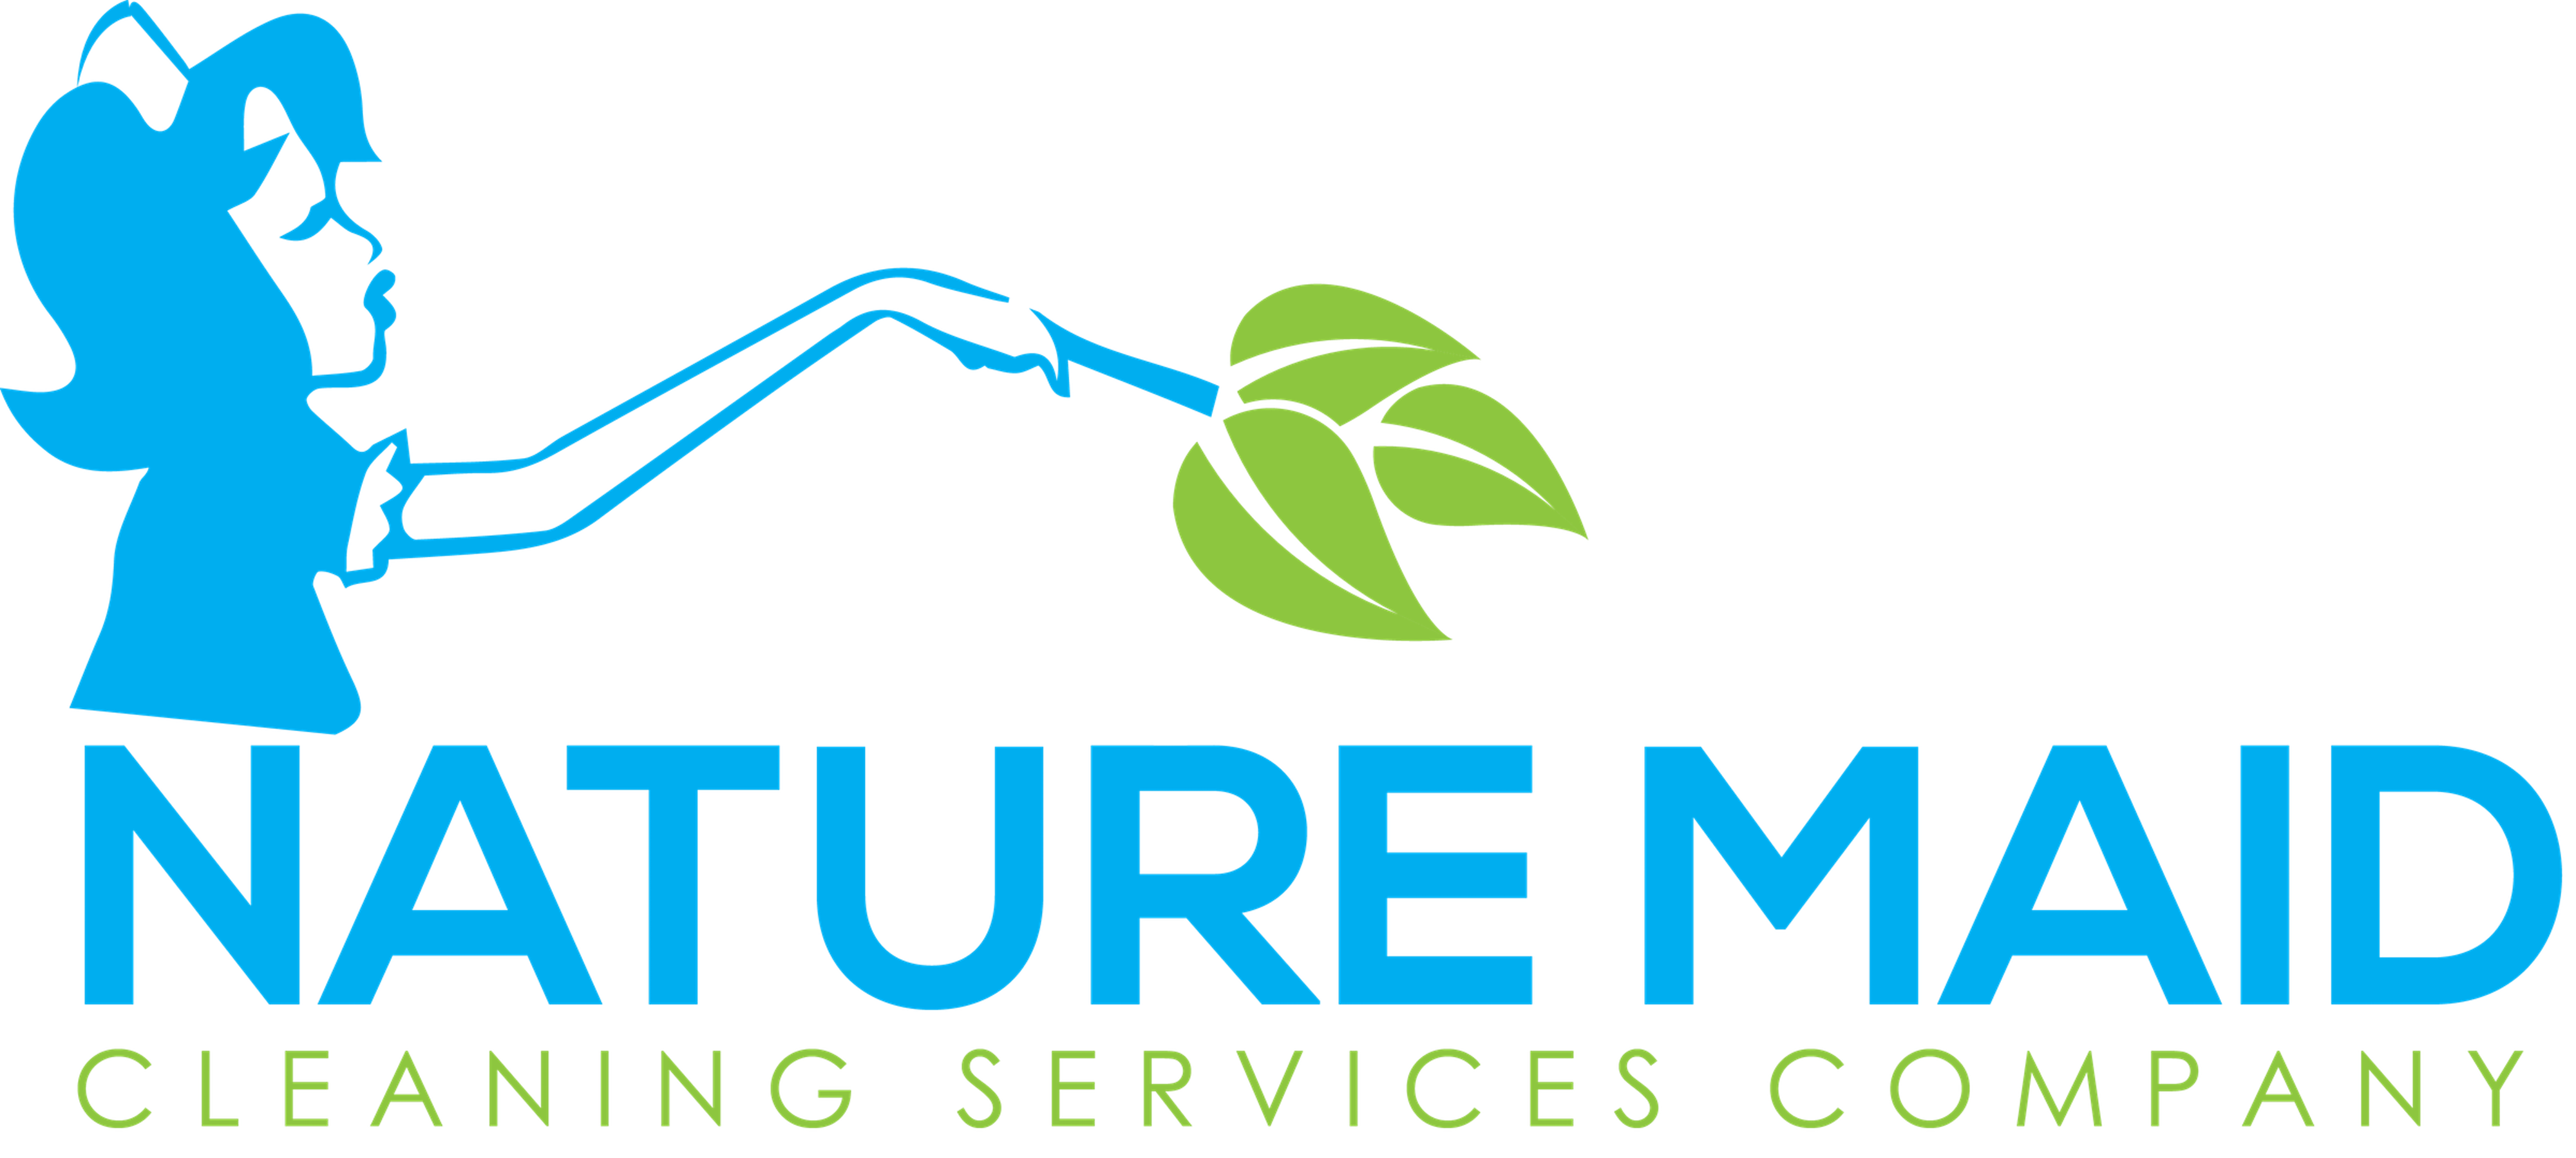 Nature Maid Cleaning Service Company Logo